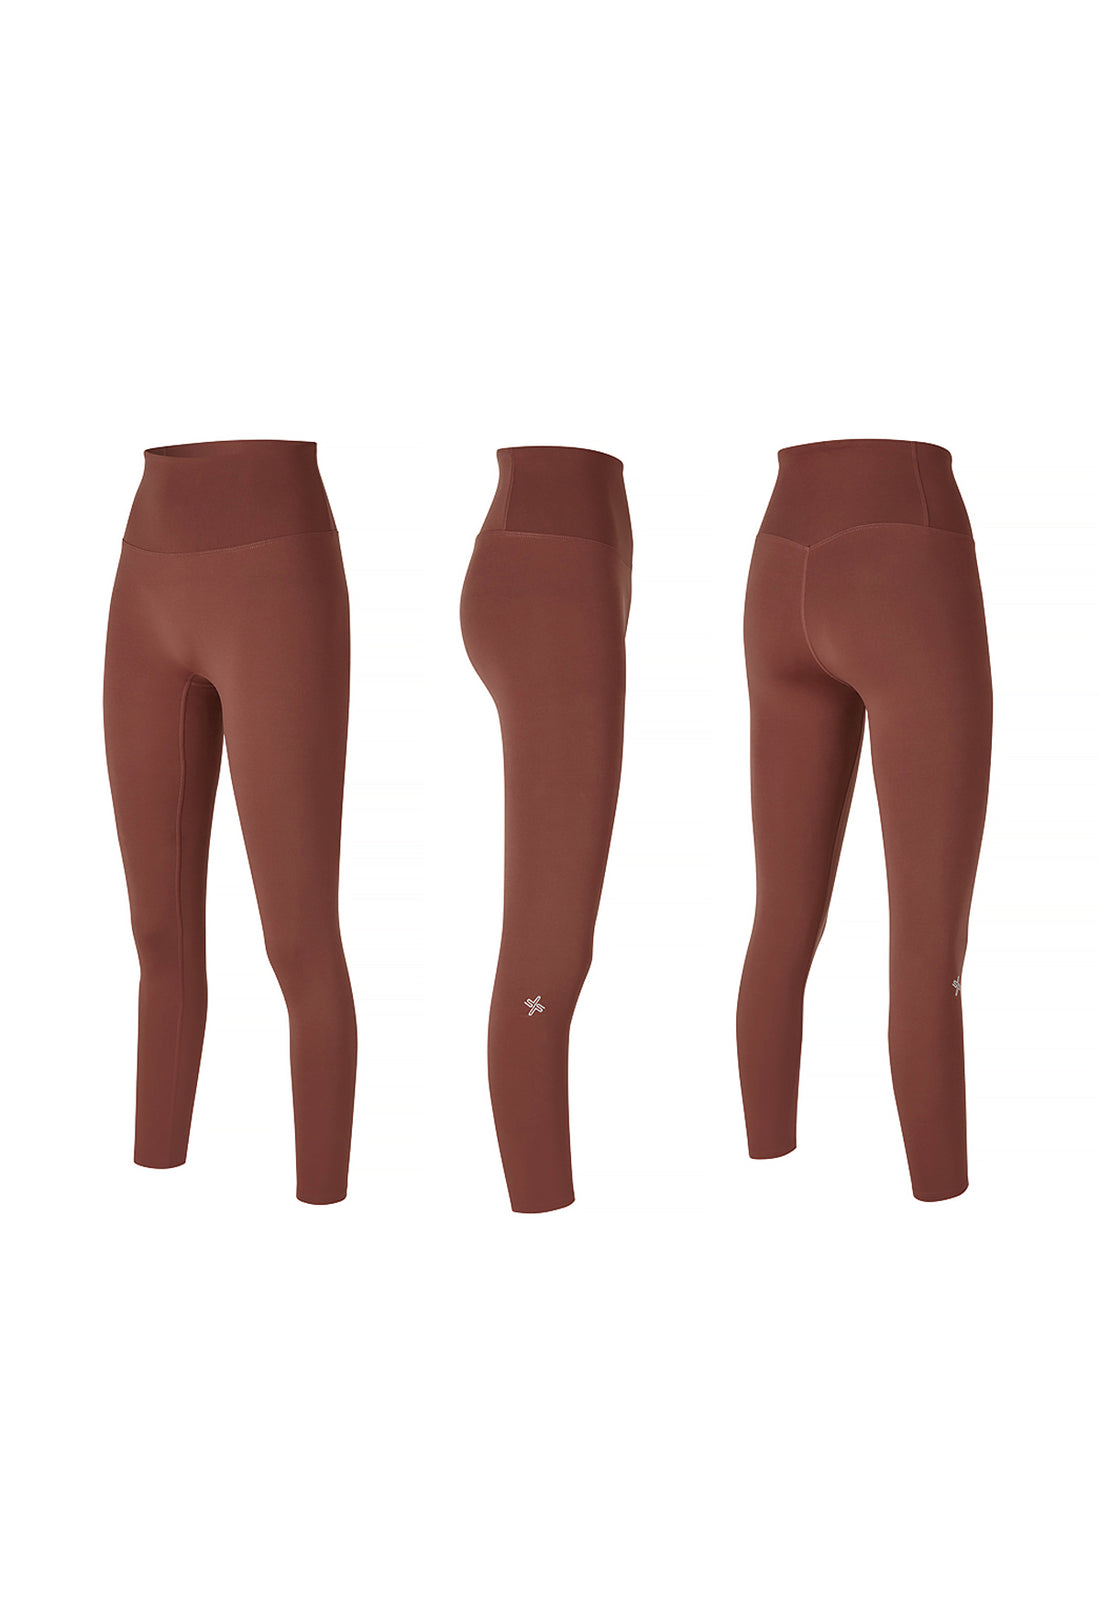 XEXYMIX Uptension Leggings - Fall in Autumn